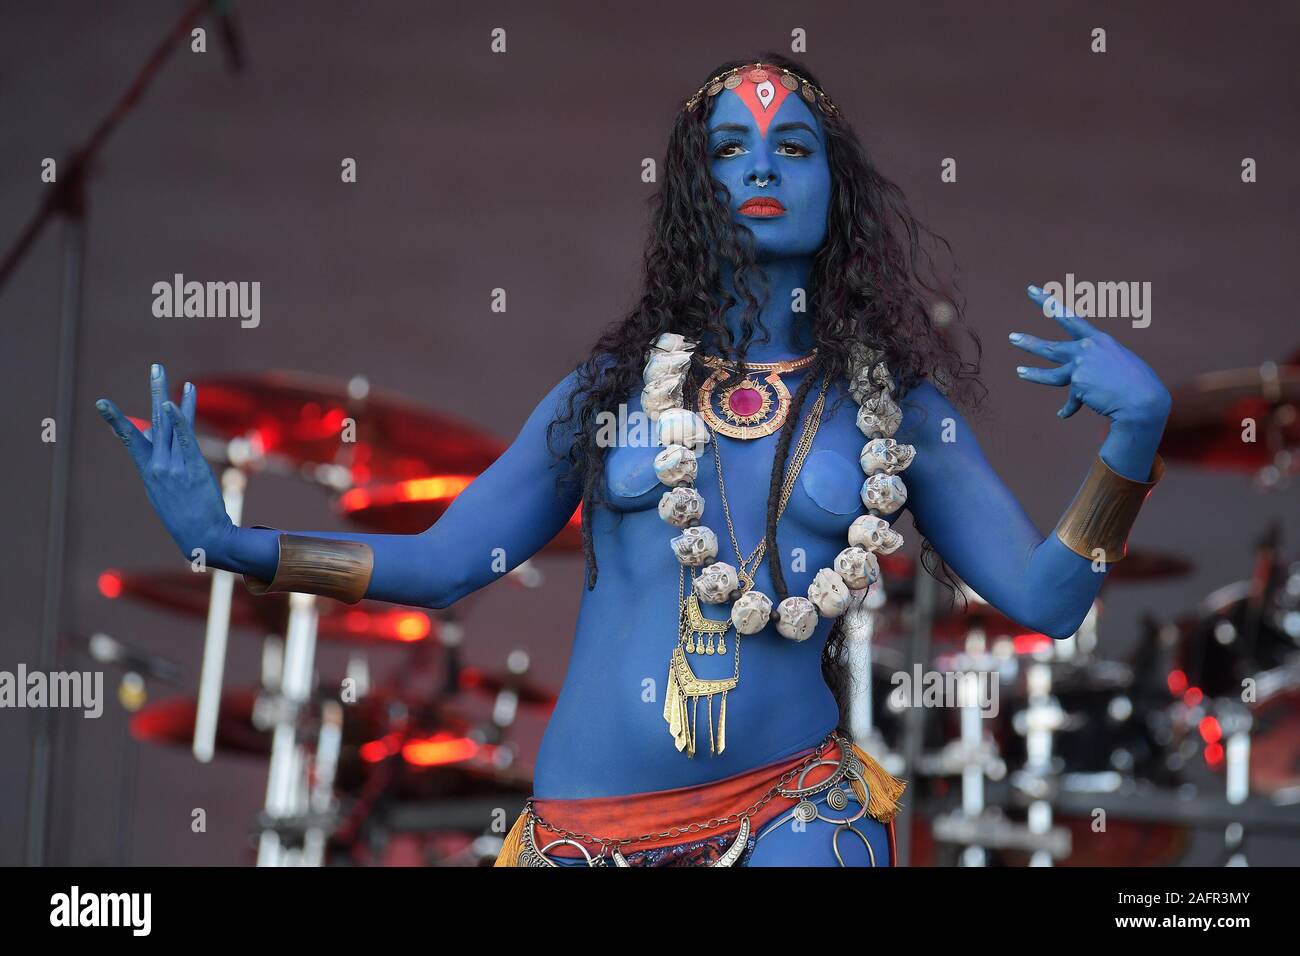 Rio de Janeiro, Brazil, October 4, 2019. Actress and dancer Alinne Madelon representing Goddess Kali during the Torture Squad concert at Rock in Rio i Stock Photo